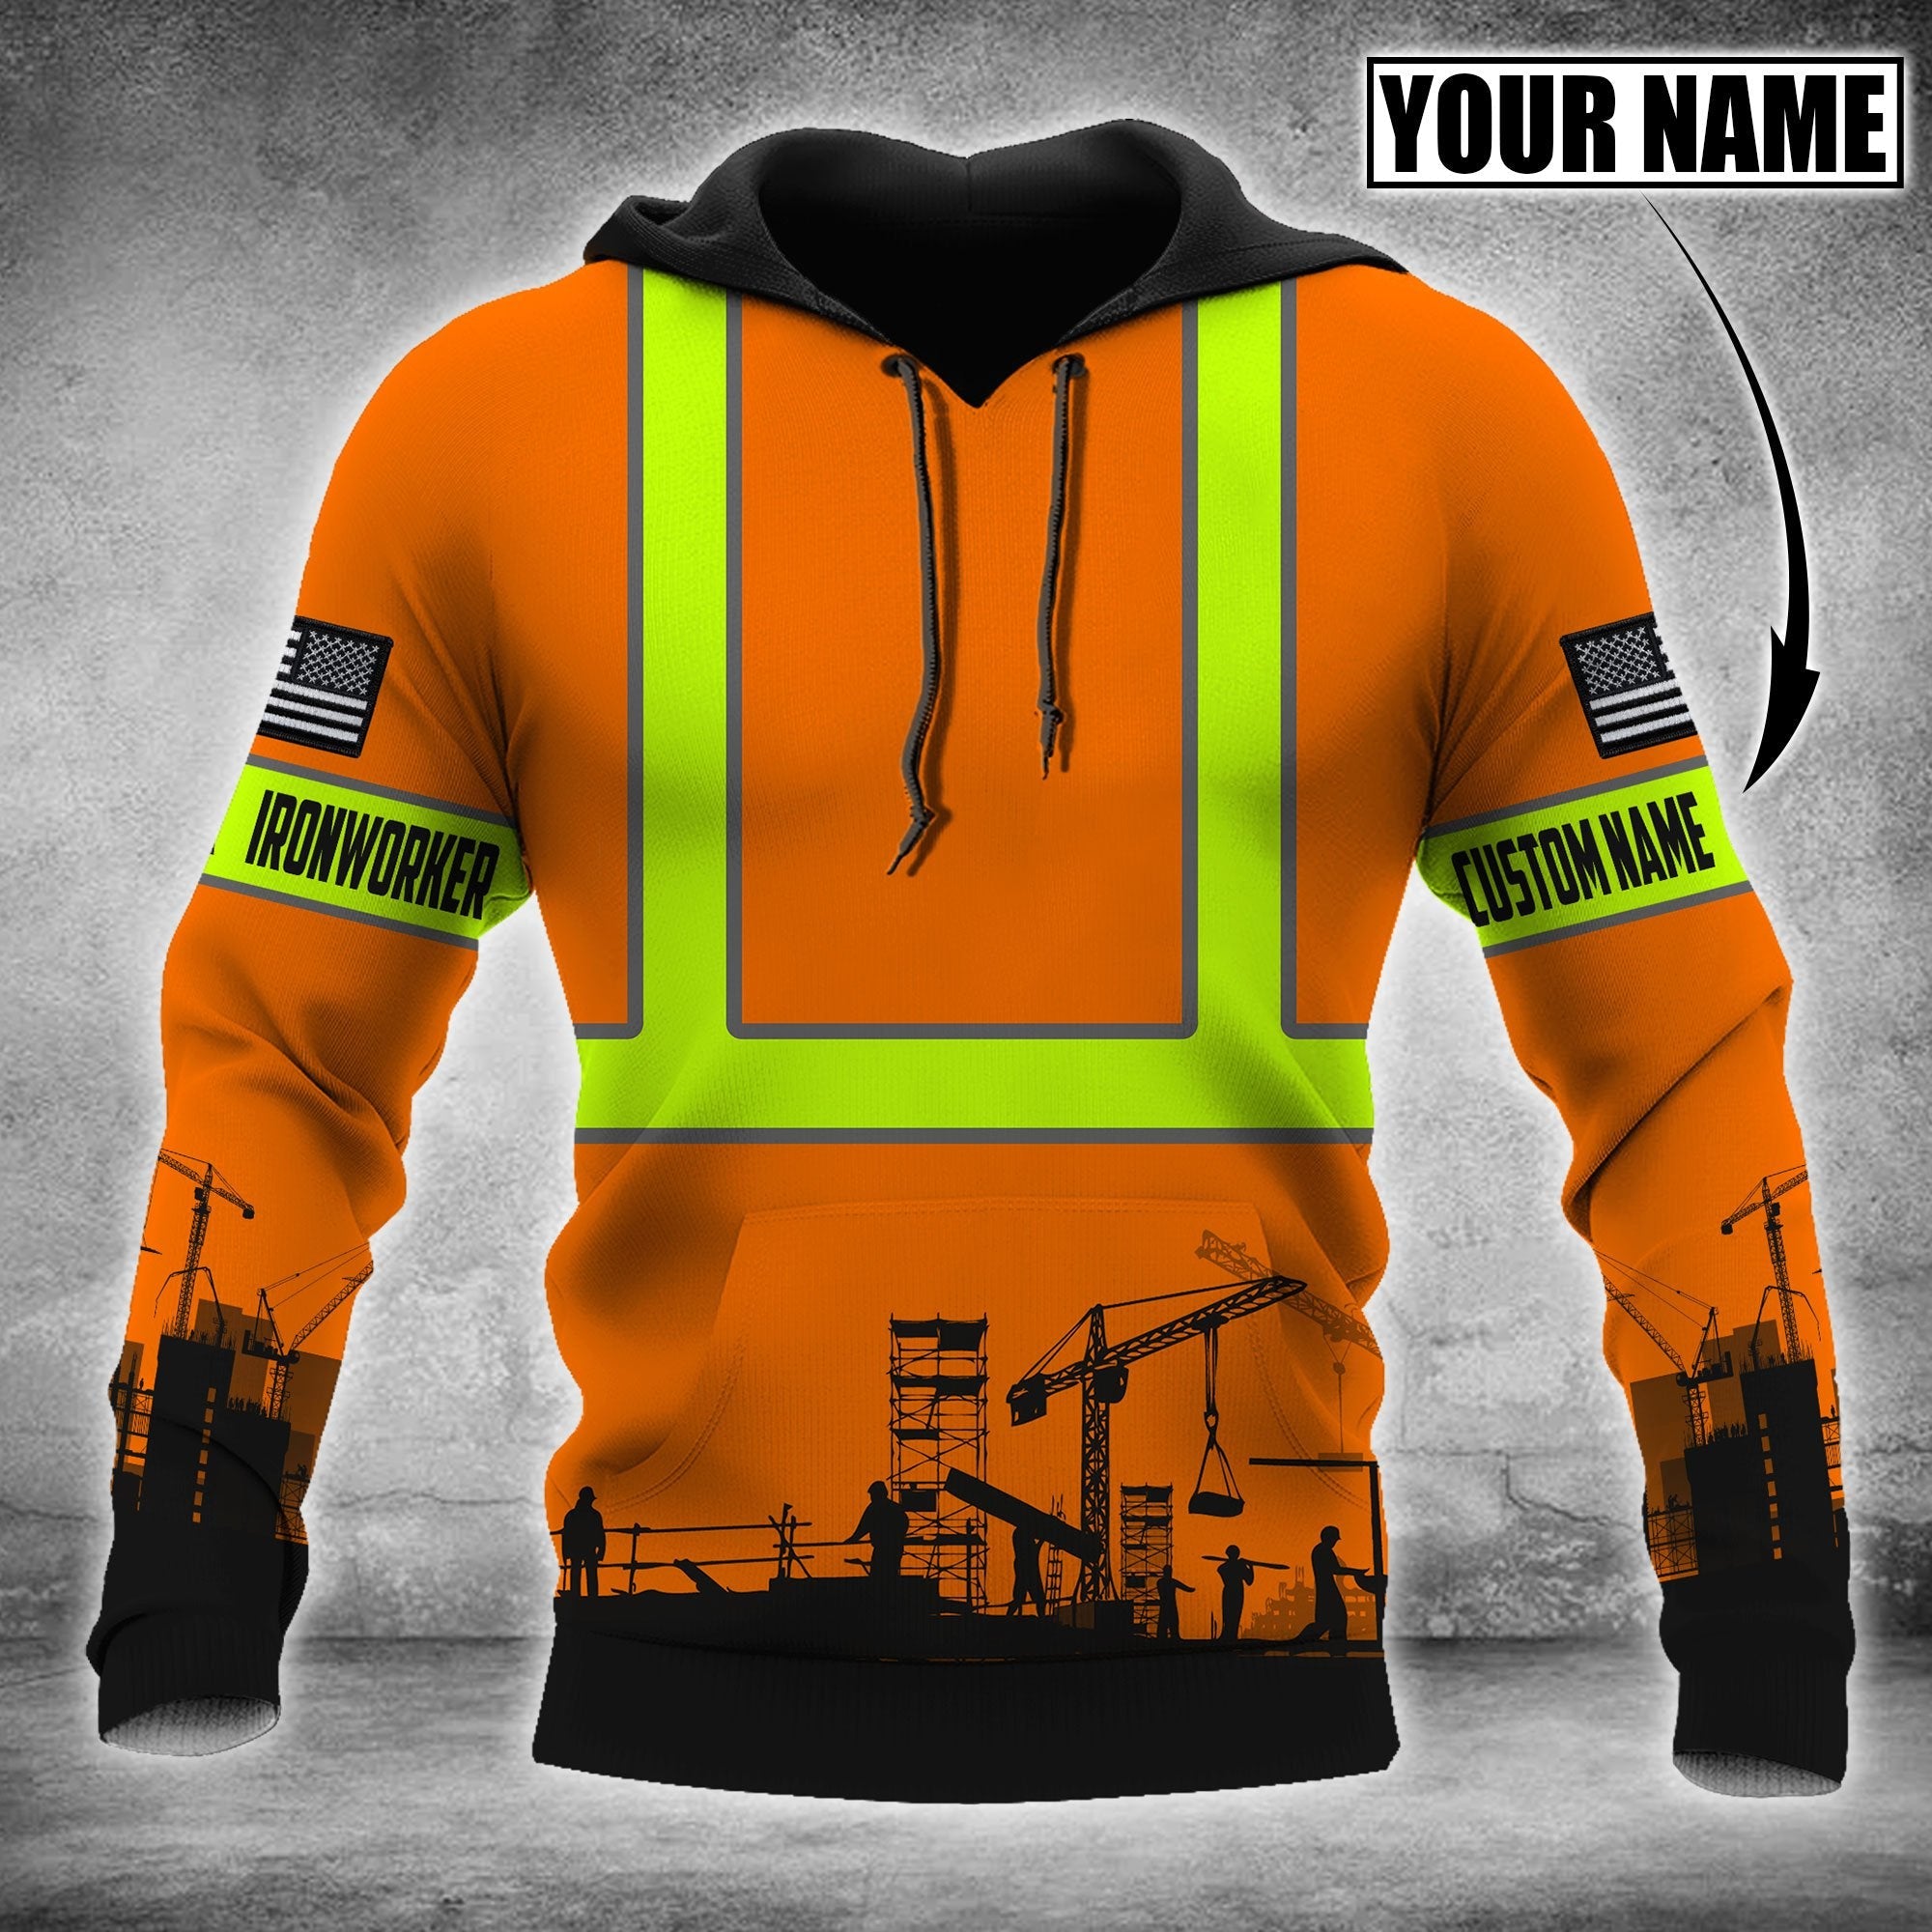 Personalized Ironworker Safety Unisex Shirts Tn 3D All Over Printed Custom Text Name For Men and Women – OwlOhh